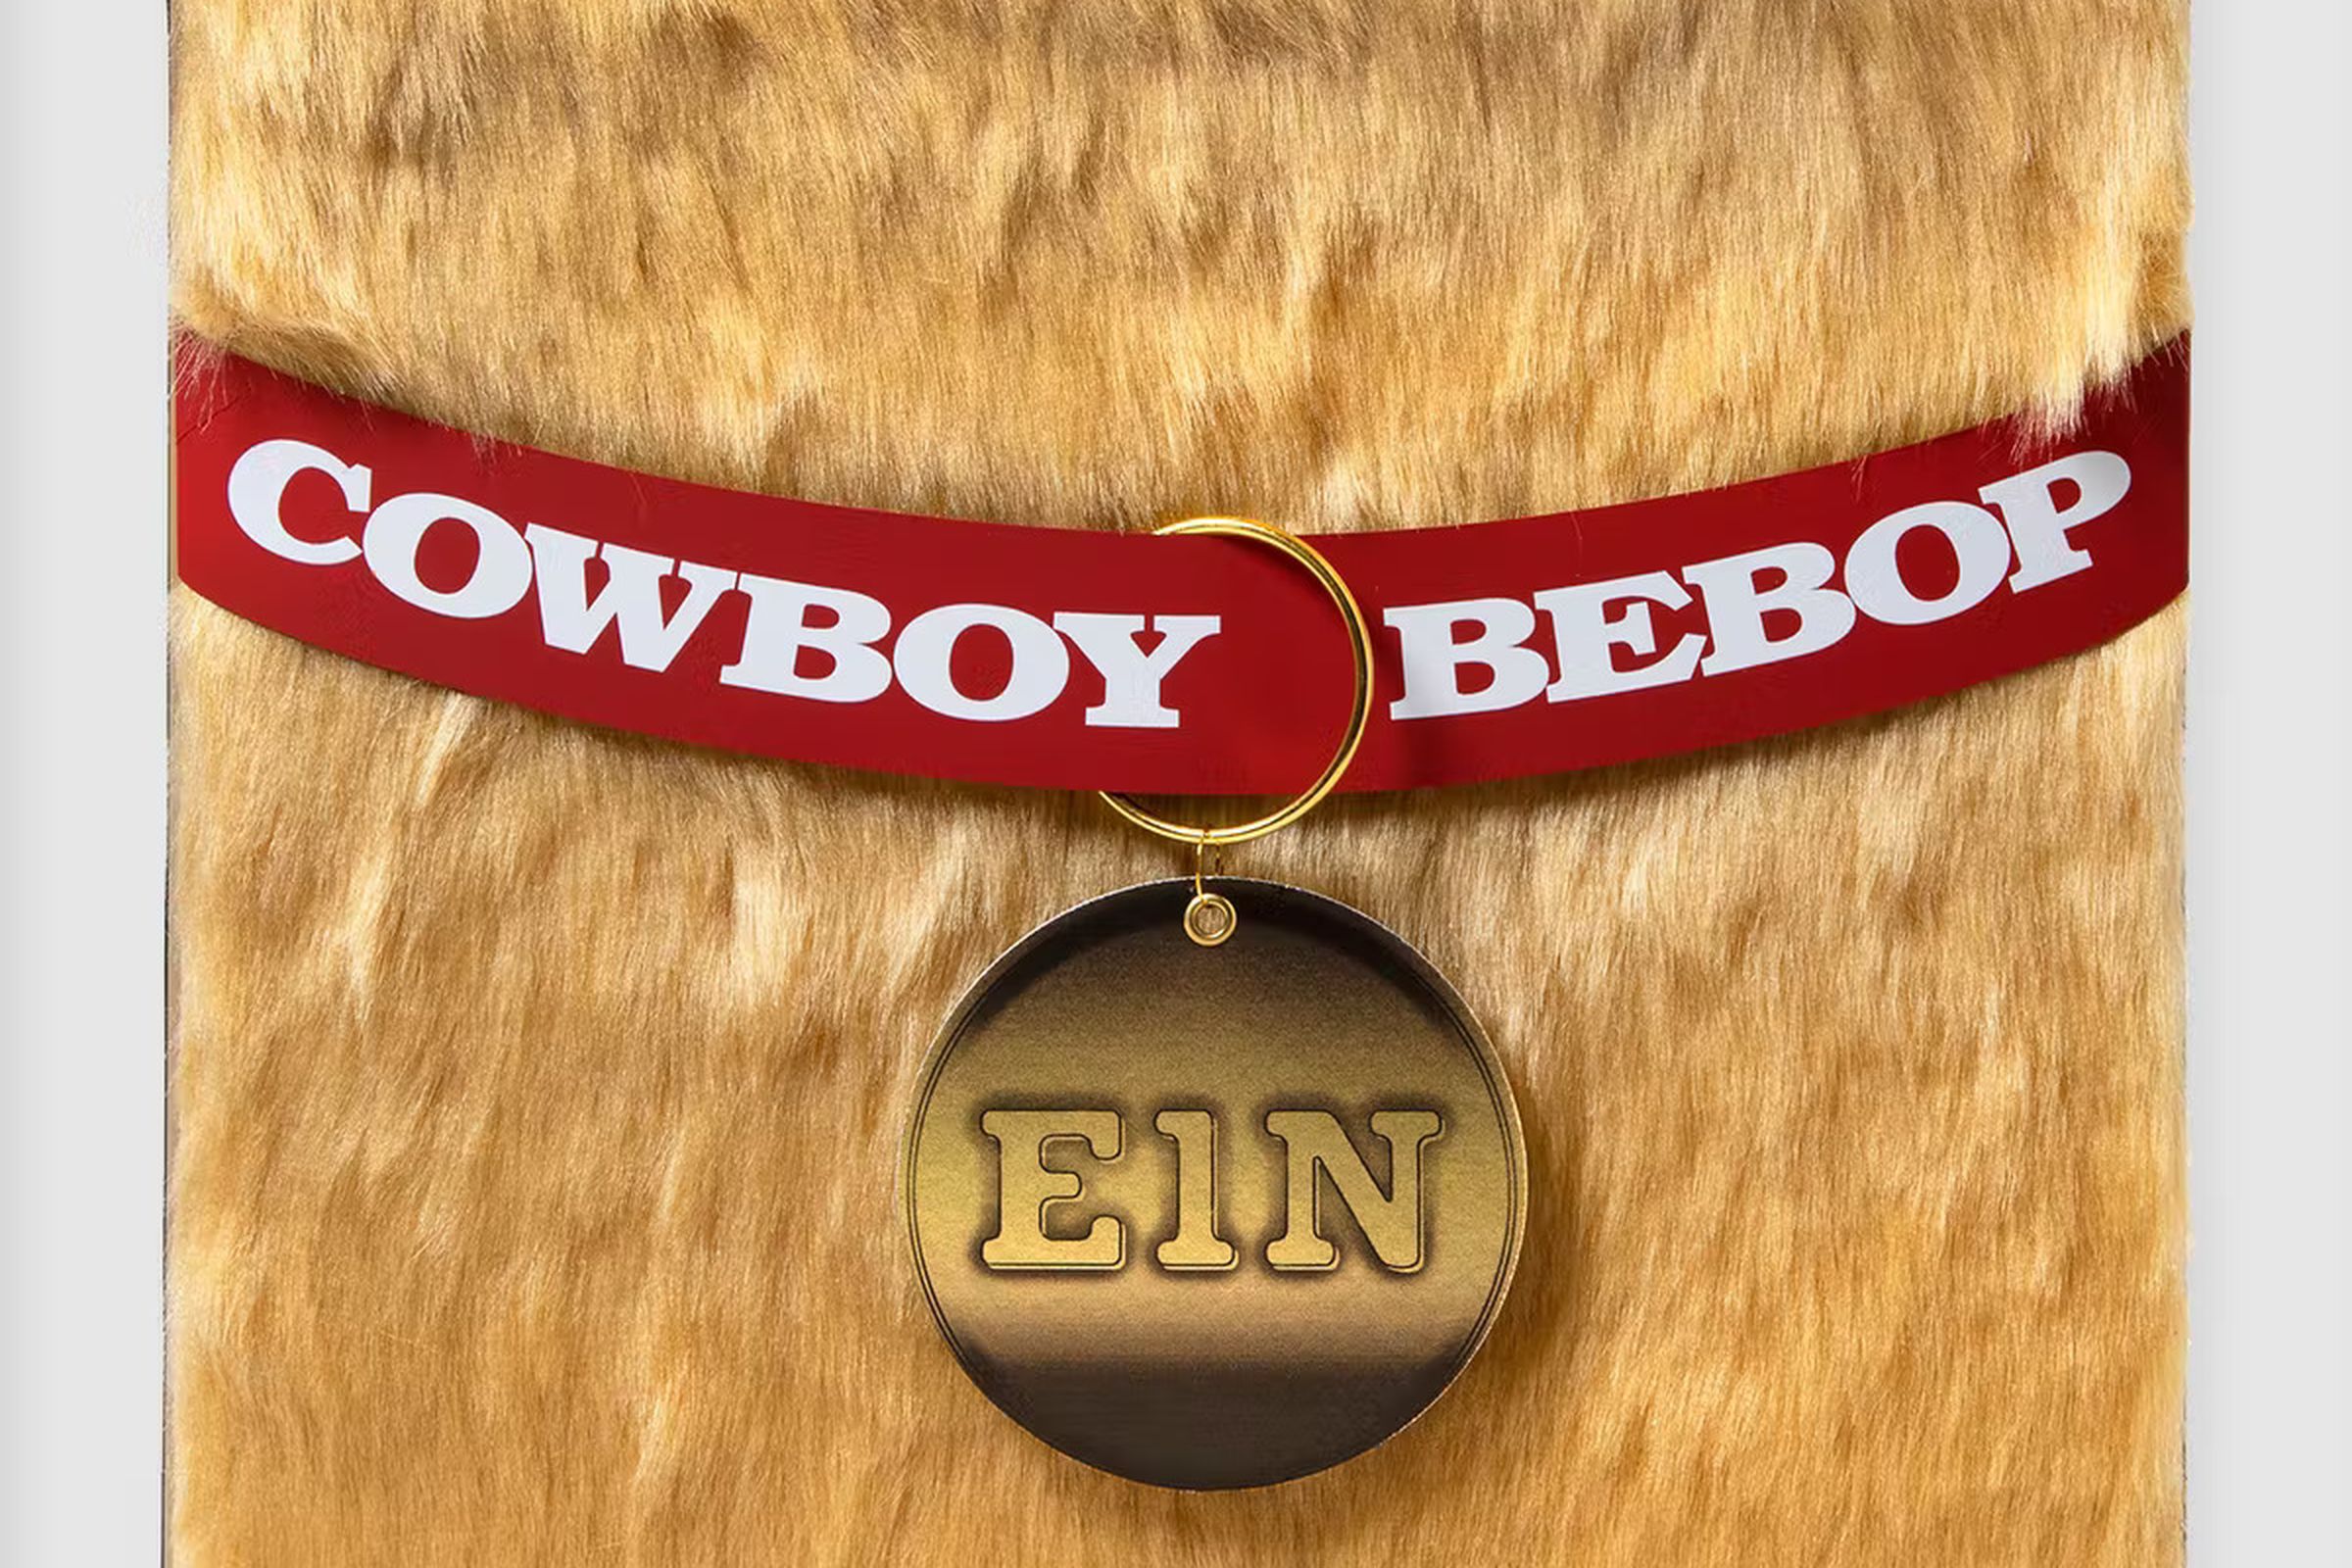 Image of Cowboy Bebop limited-edition vinyl collection featuring a furry jacket made to look like a Welsh corgi’s coat ringed with a red dog collar that says “Ein”